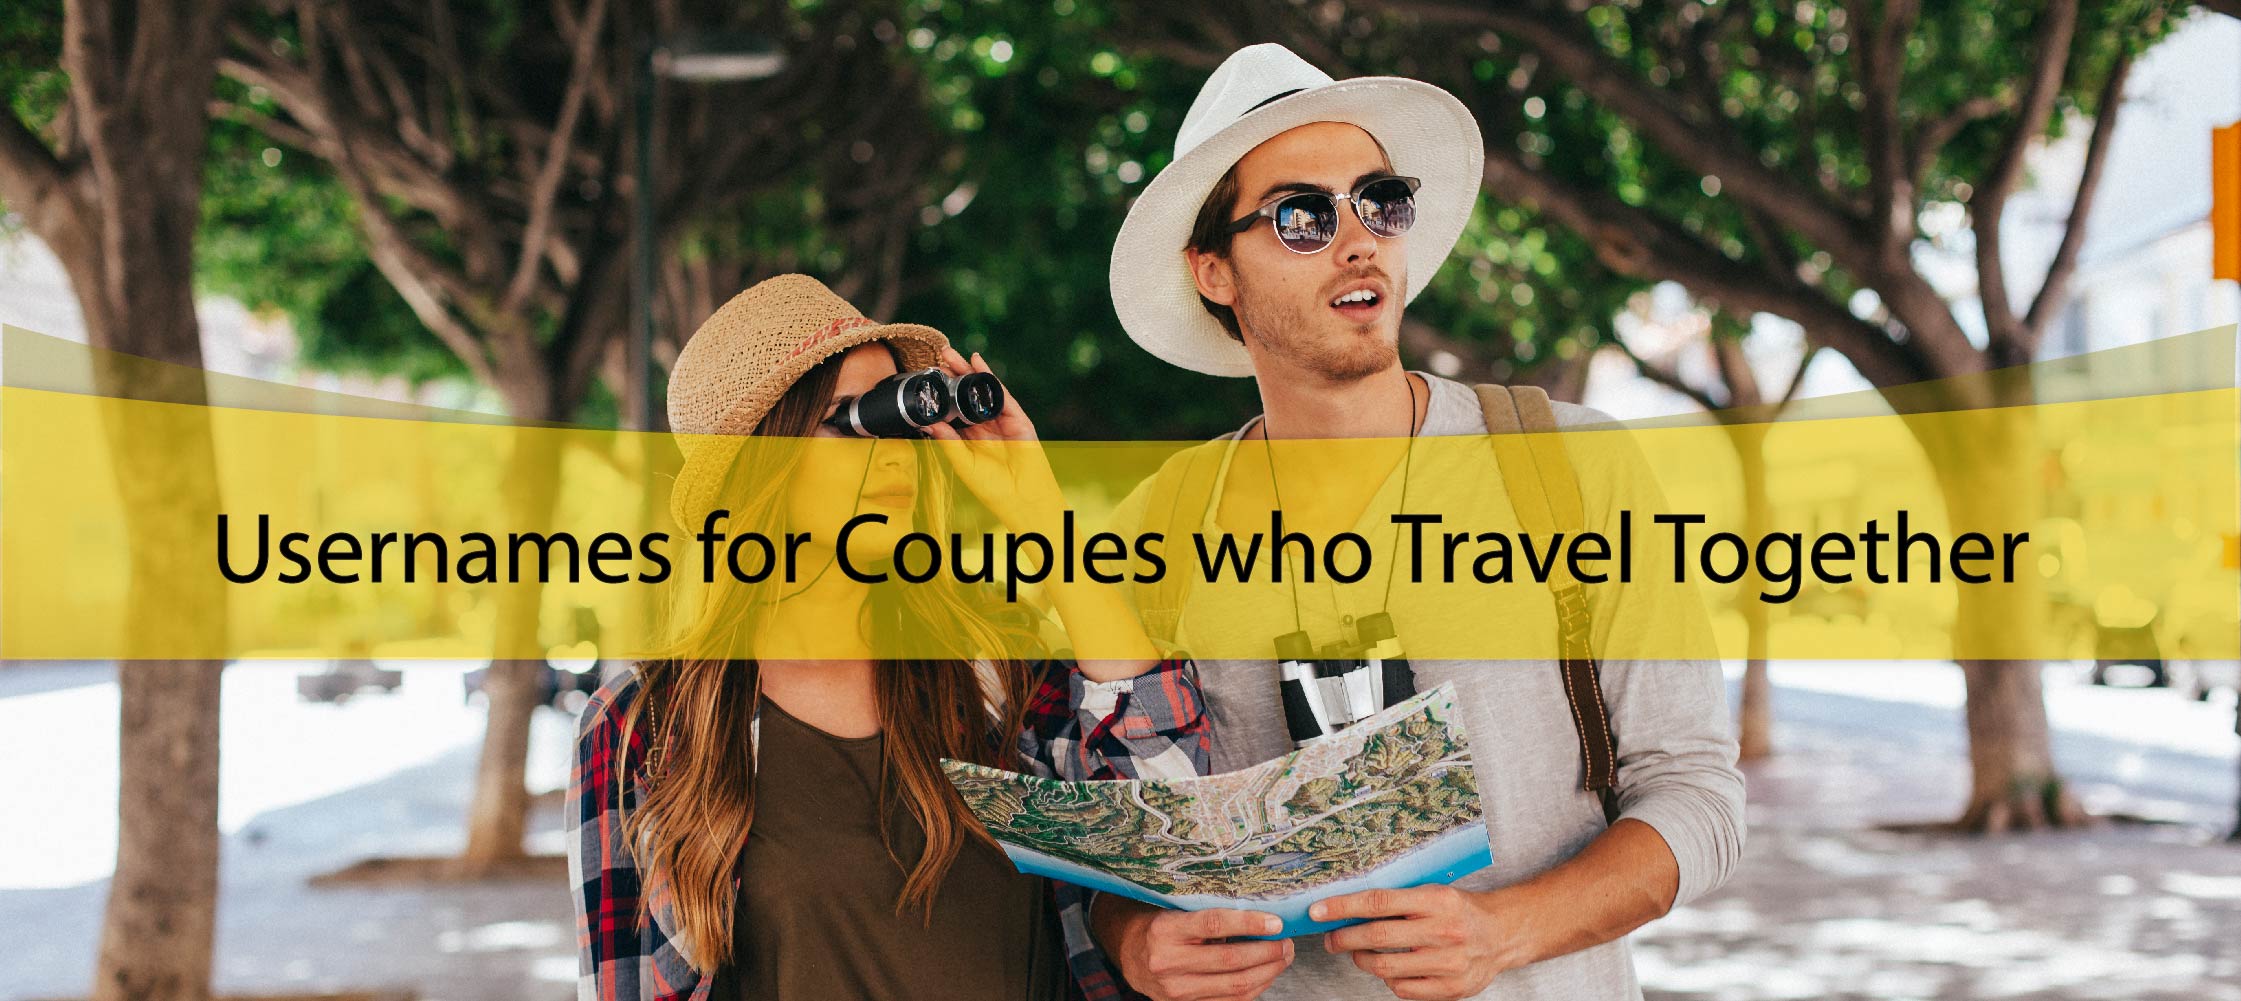 Usernames for Couples who Travel Together